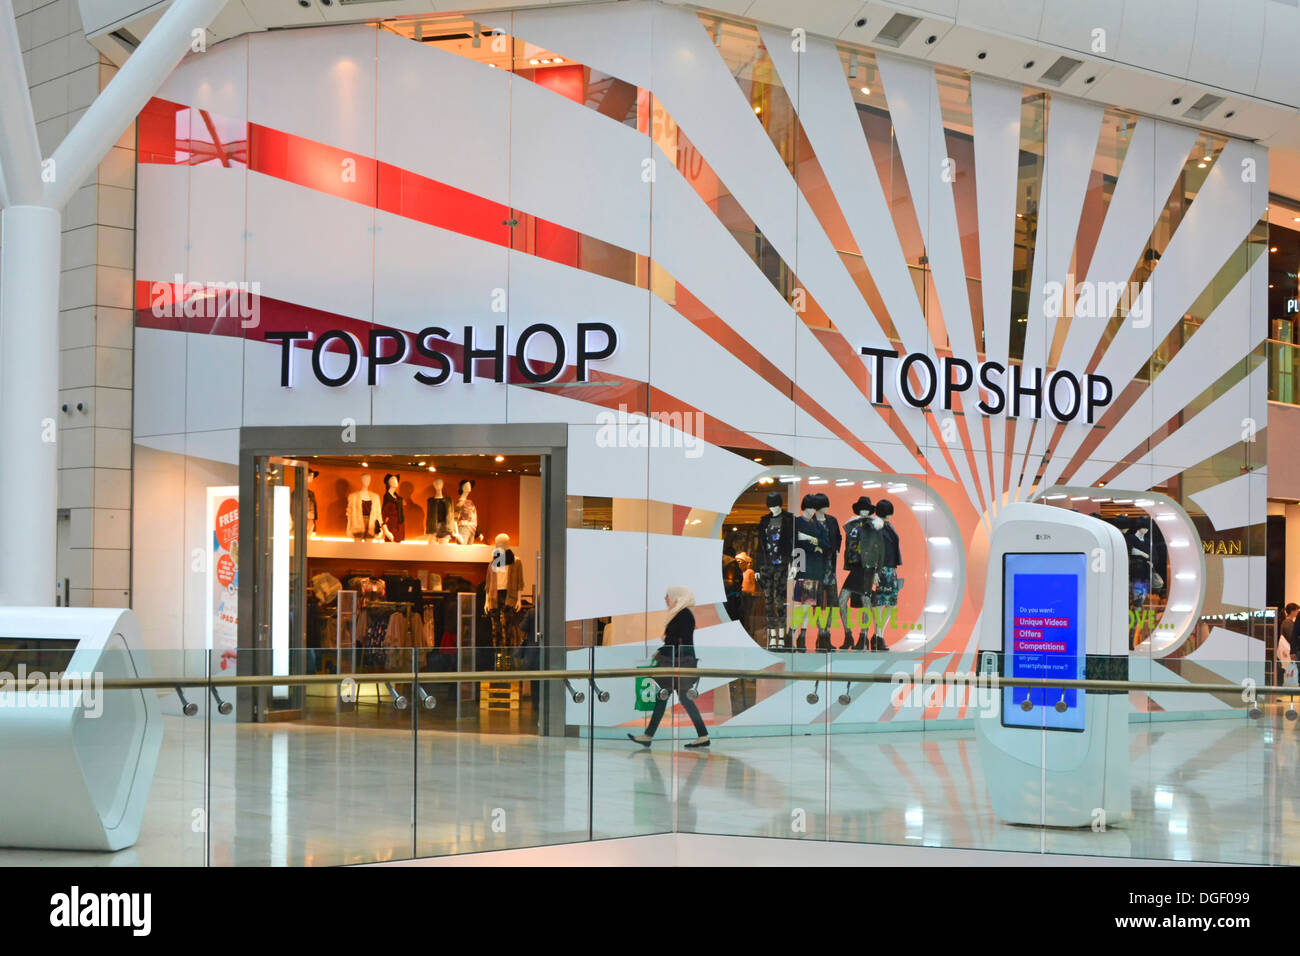 Topshop store in the Westfield indoor shopping malls Stock Photo - Alamy